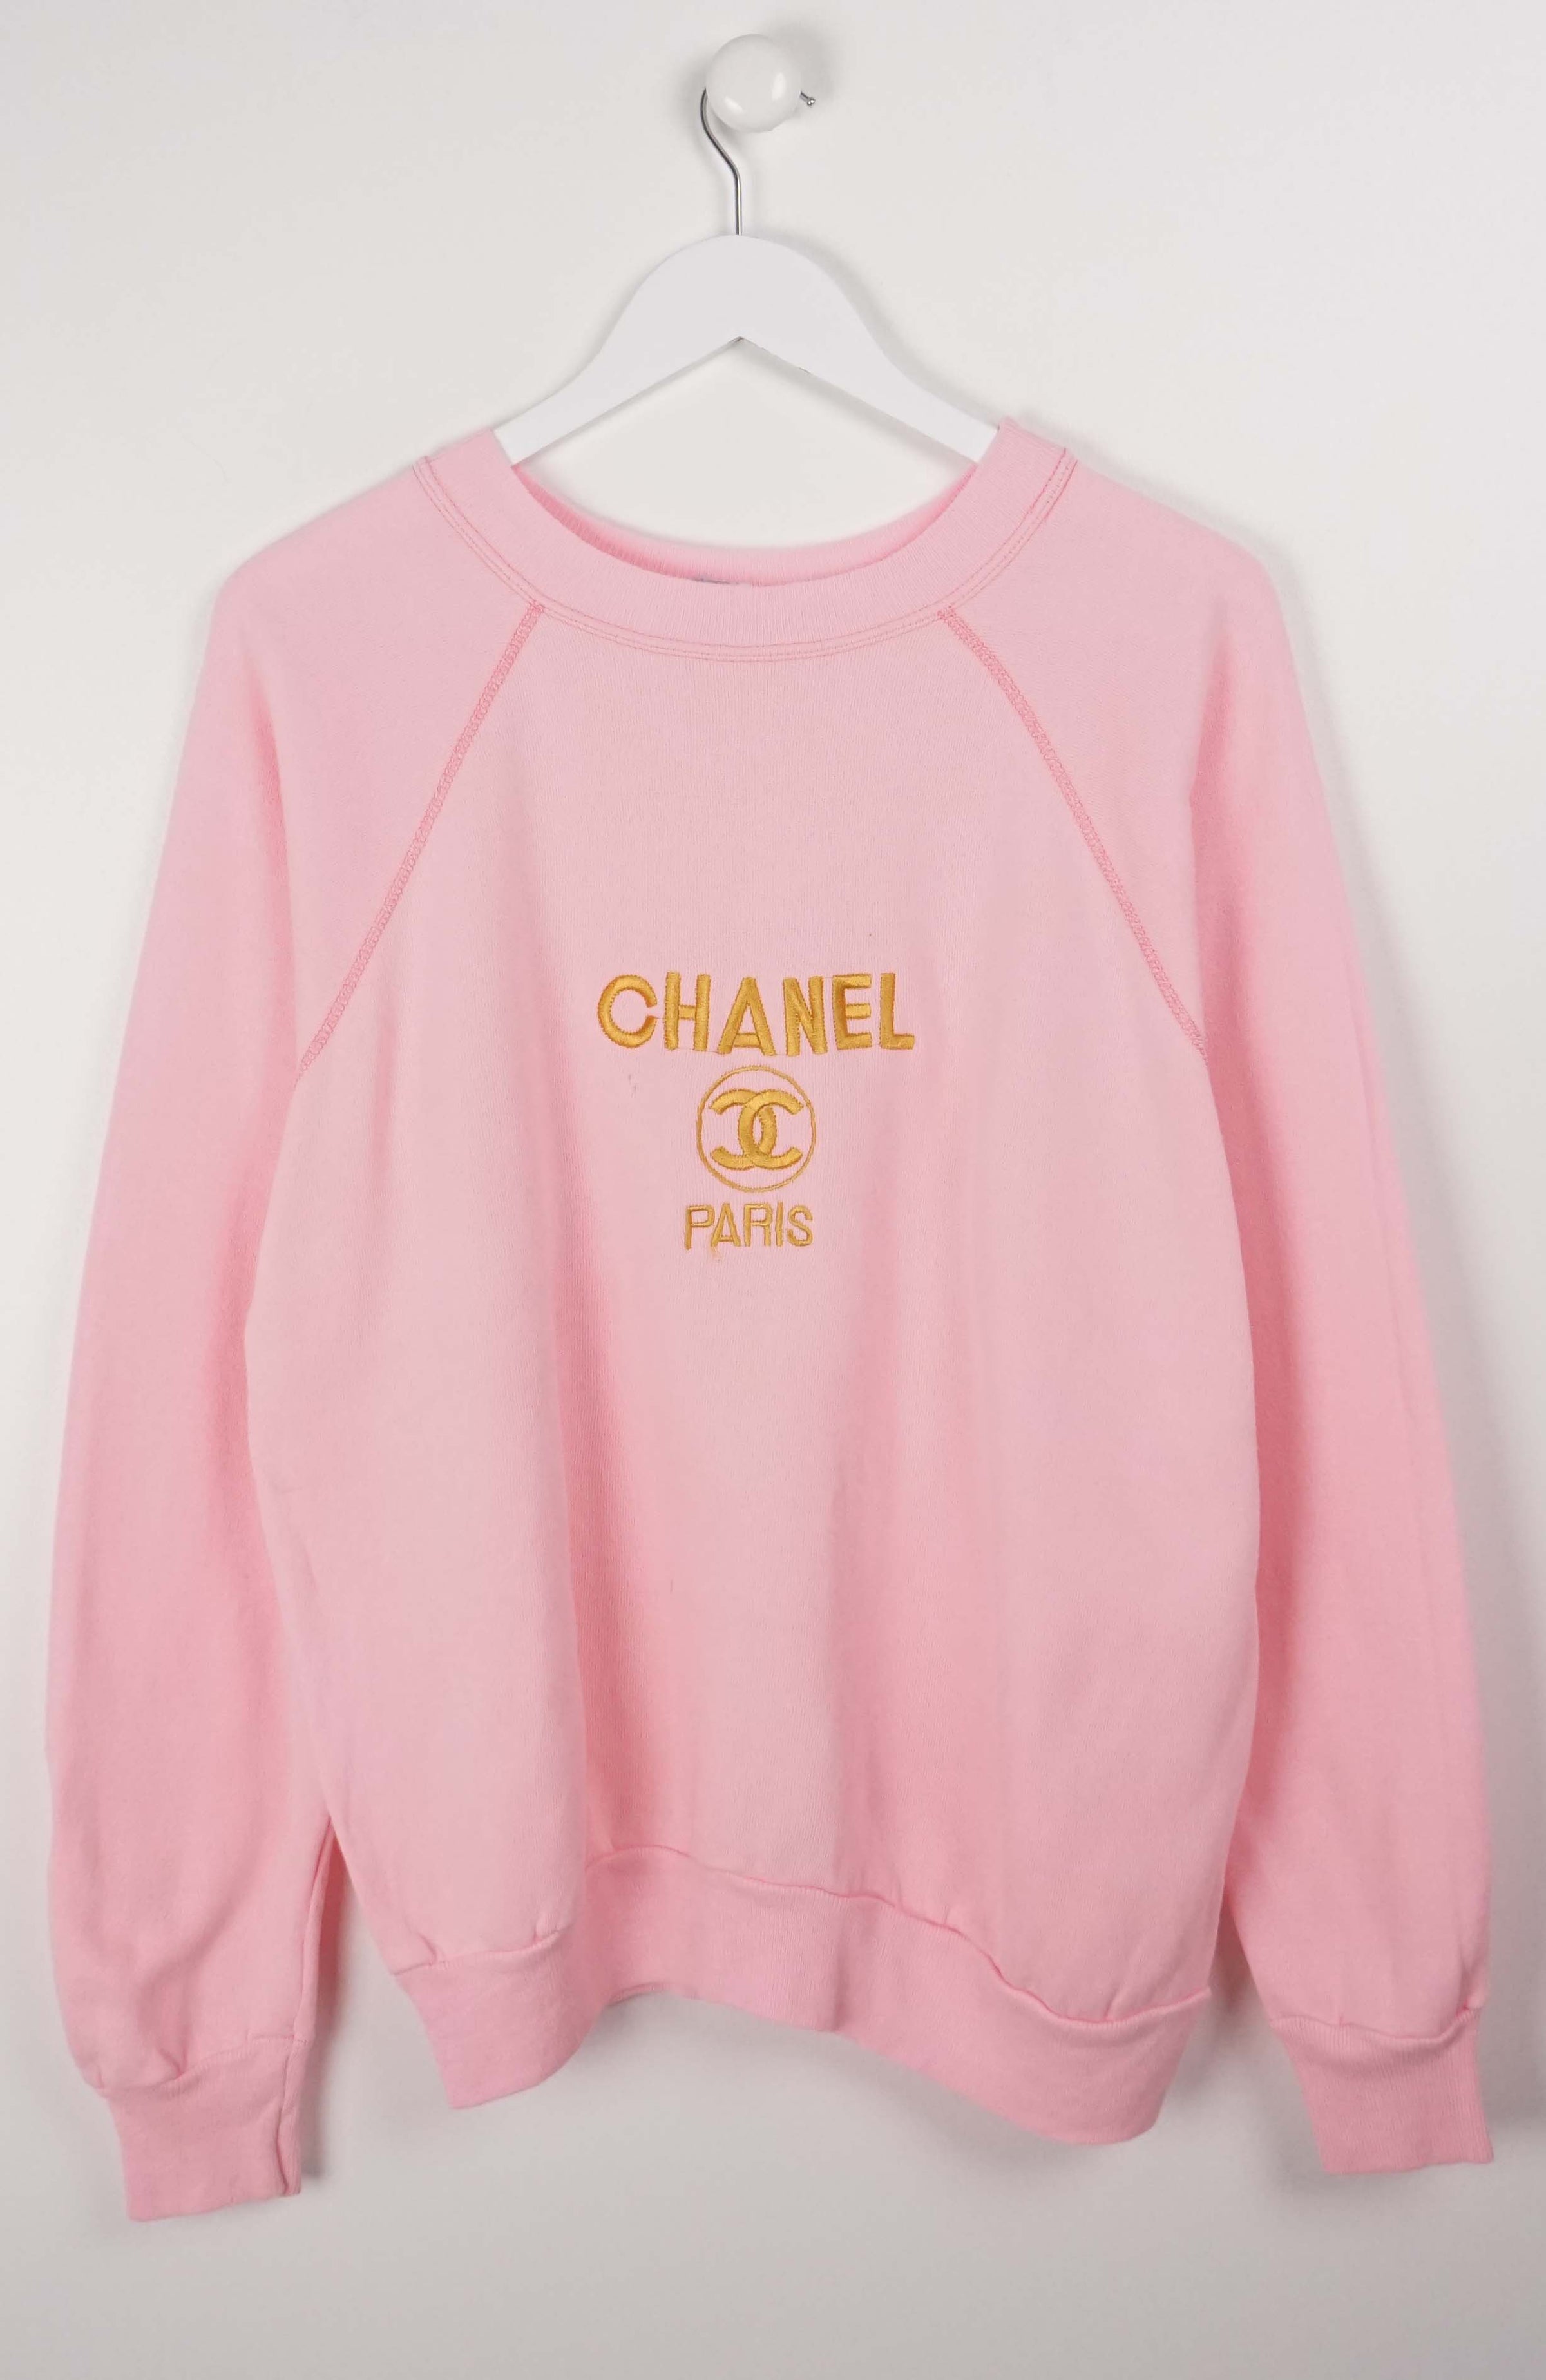 CHANEL VINTAGE LETTER LOGO TERRY CLOTH JUMPER SWEATER TOP